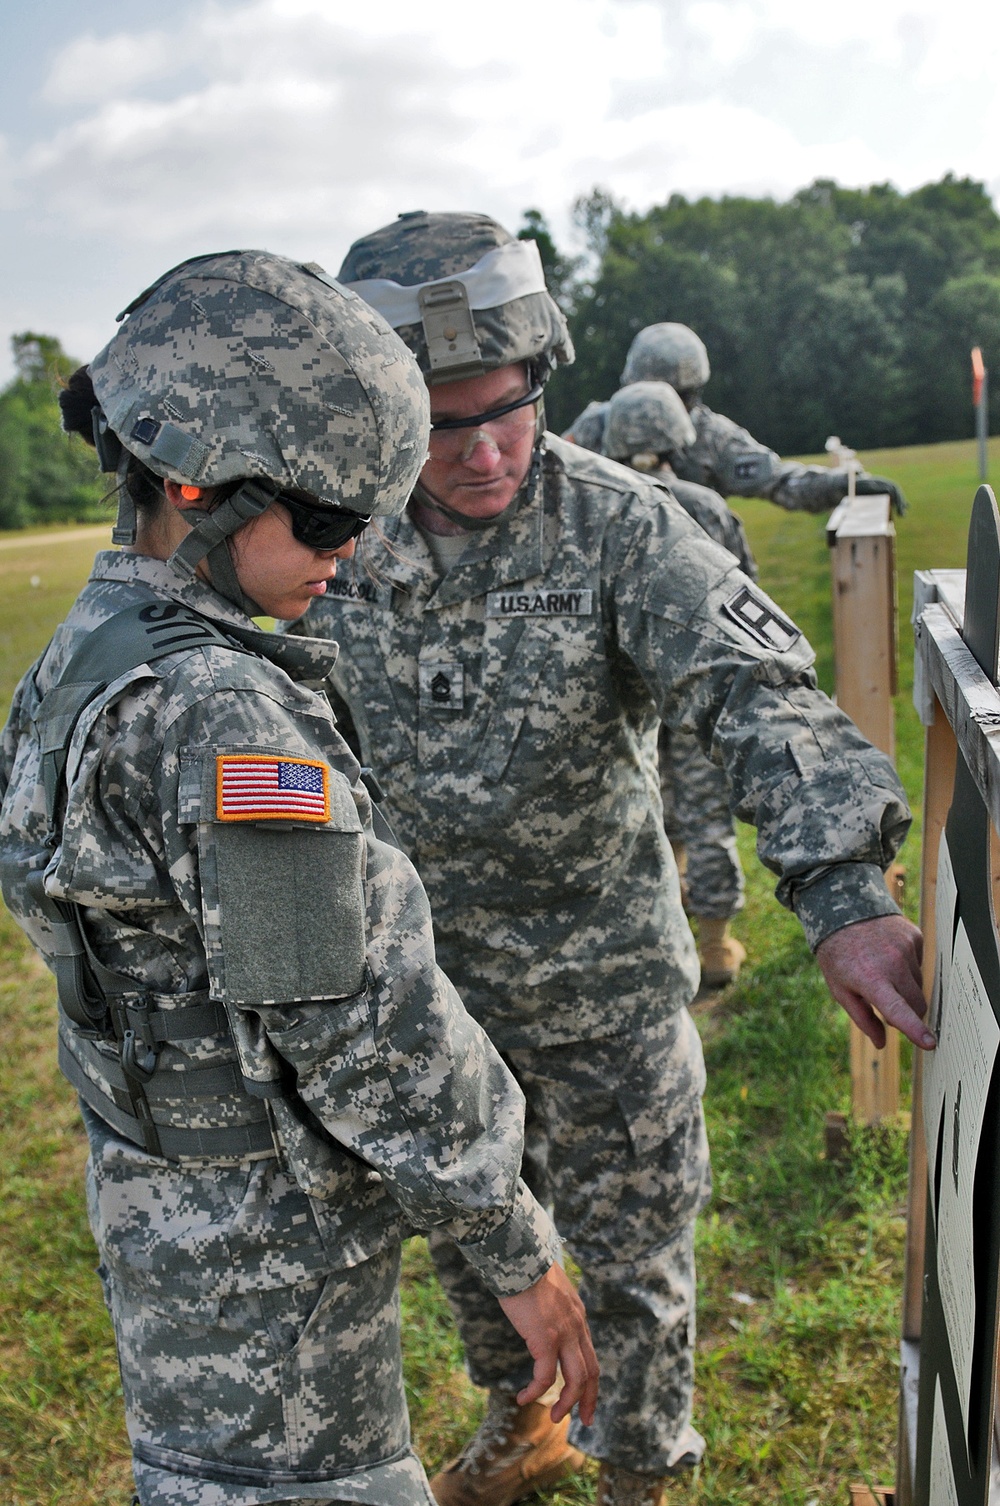 Army Reserve soldiers review shot group at zero range